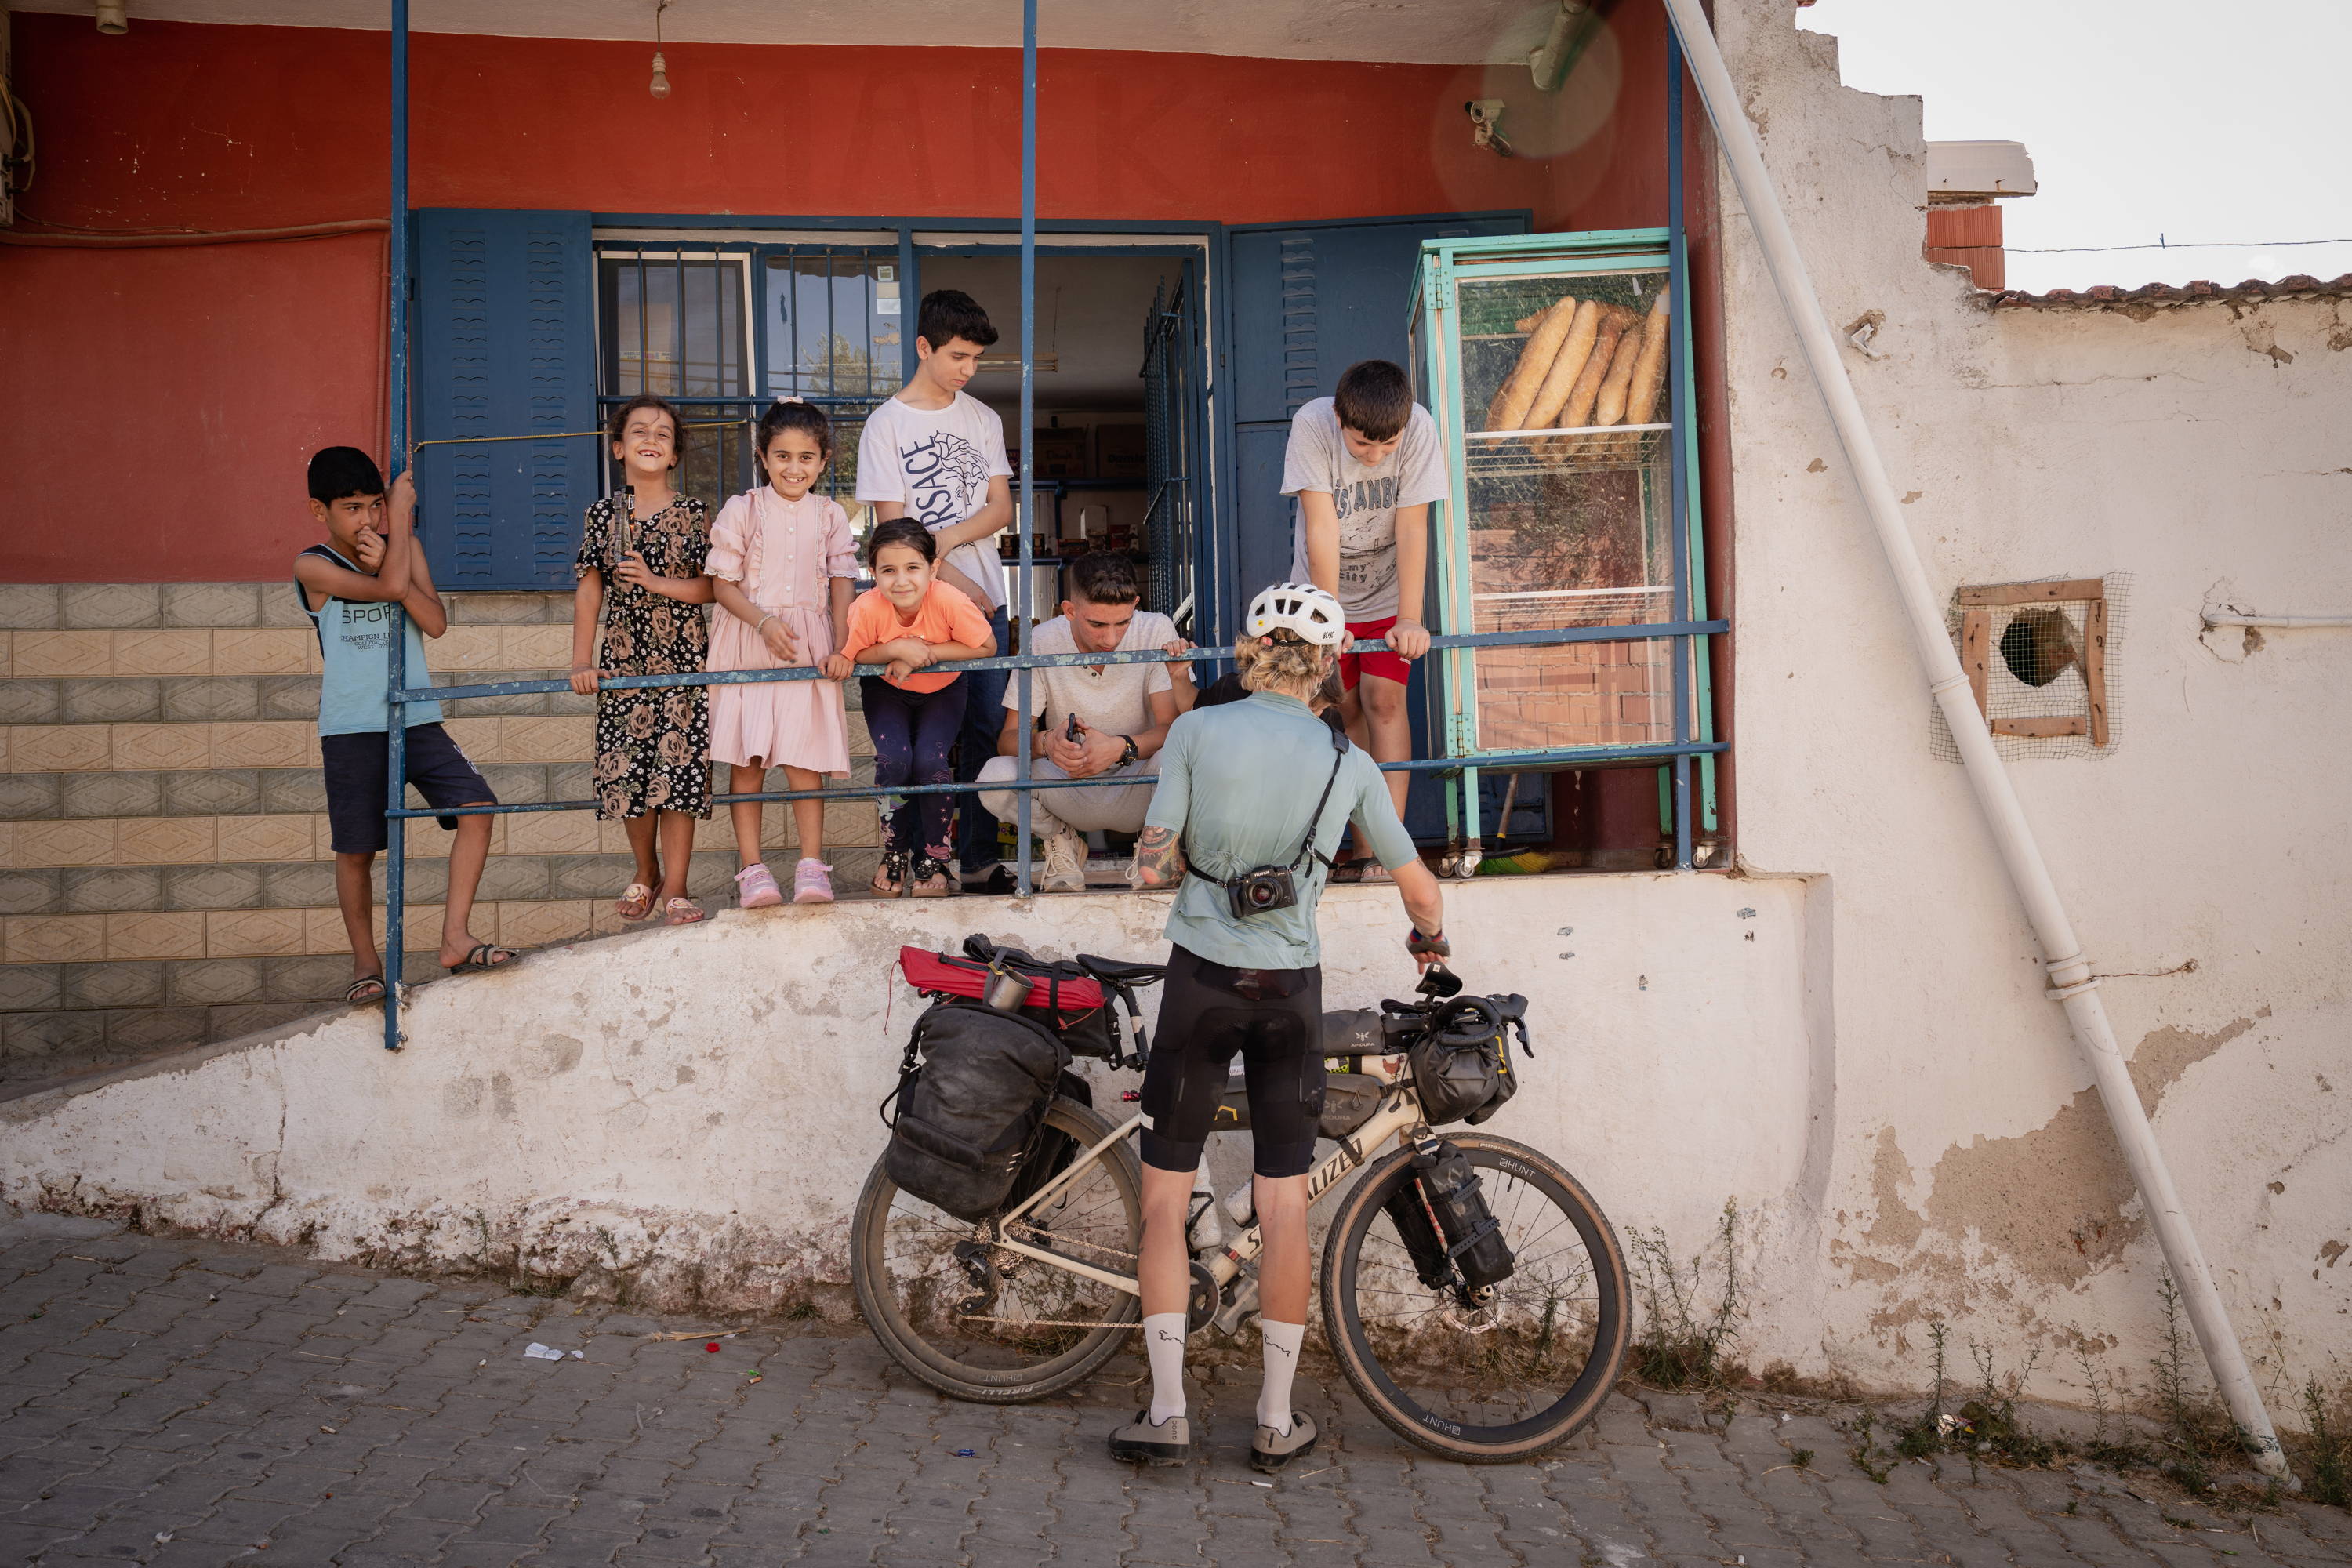 Boru standing his bike up against a wall with smiling kids watching